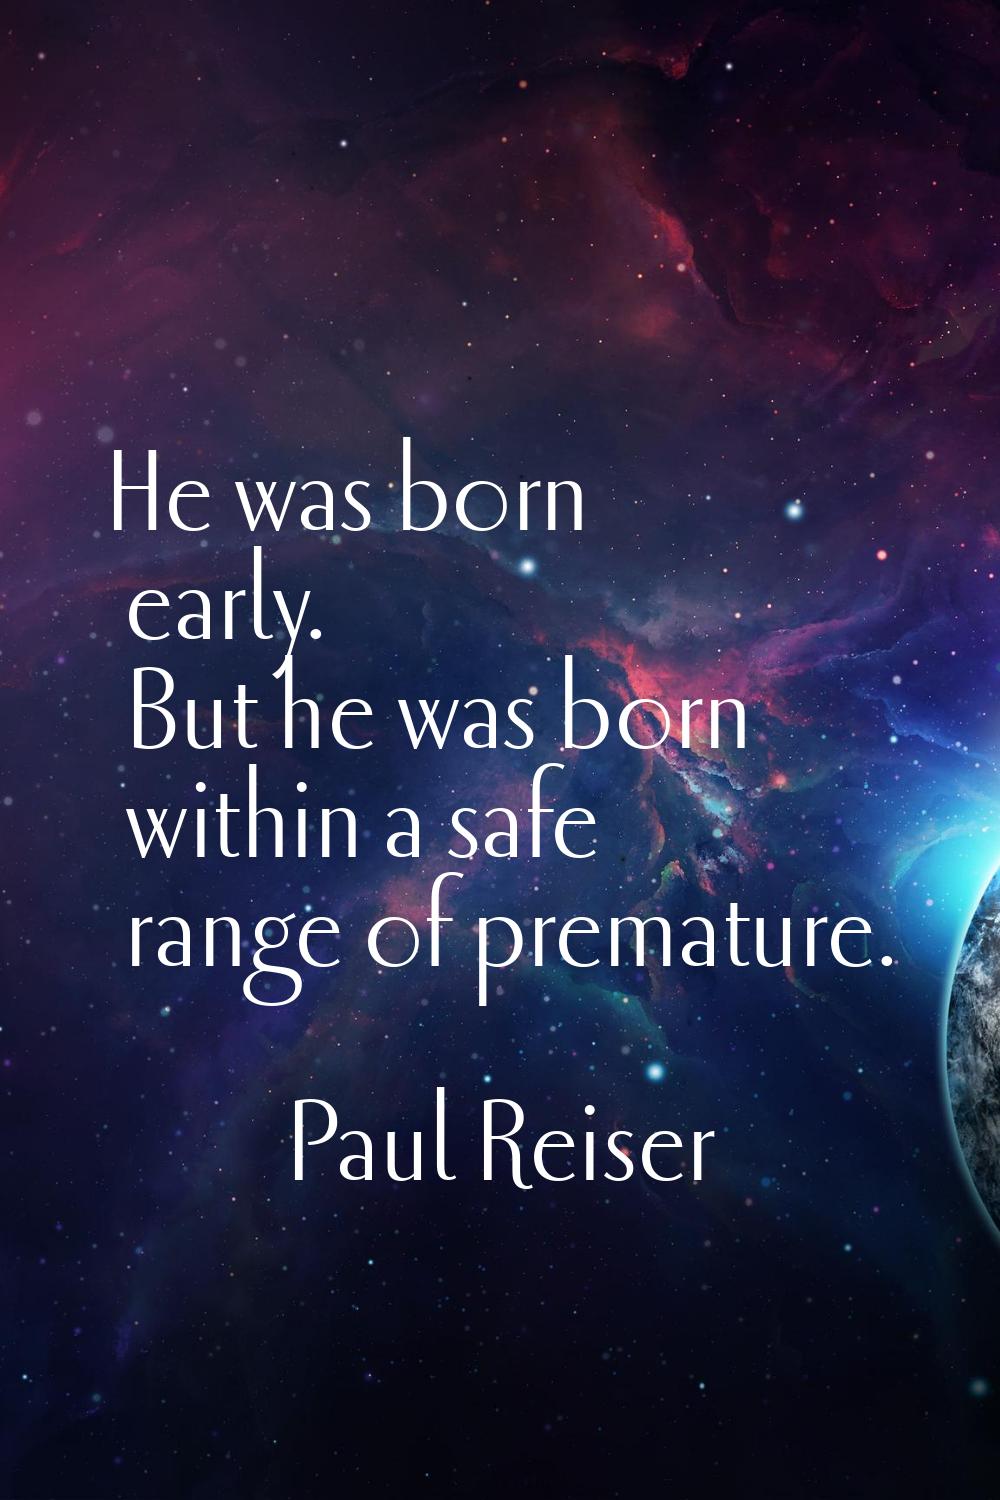 He was born early. But he was born within a safe range of premature.